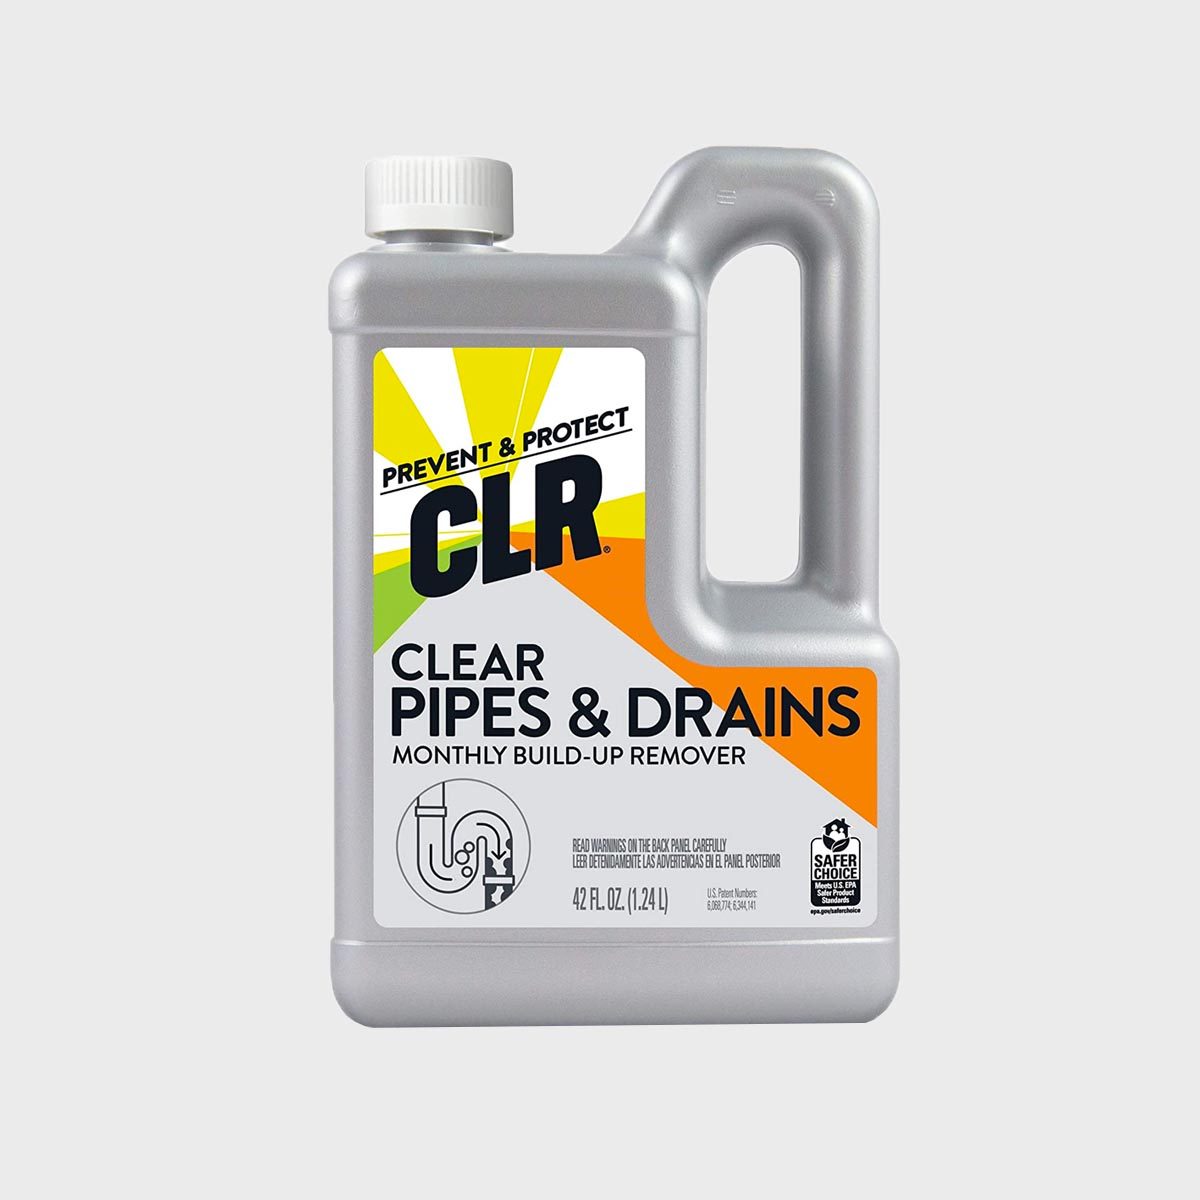 Innovative Drain Cleaner Quickly Opens Clogged Drains With…